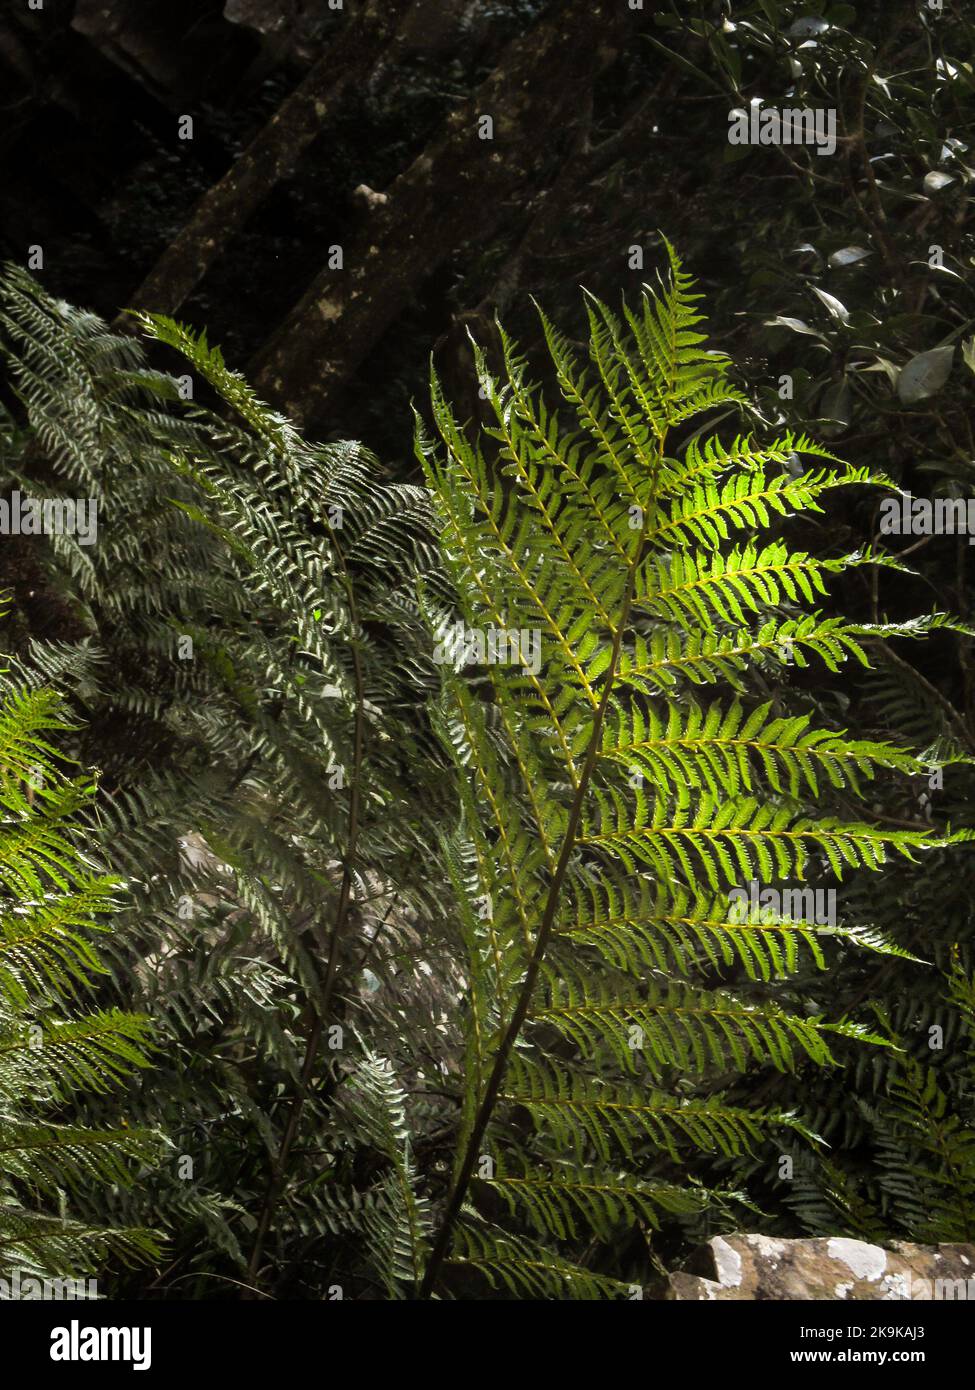 Sunlight shining through the serrated fonds of a forest tree fern, Alsophila capensis, in the indigenous Afromontane forest at Kaapsche Hoop Stock Photo